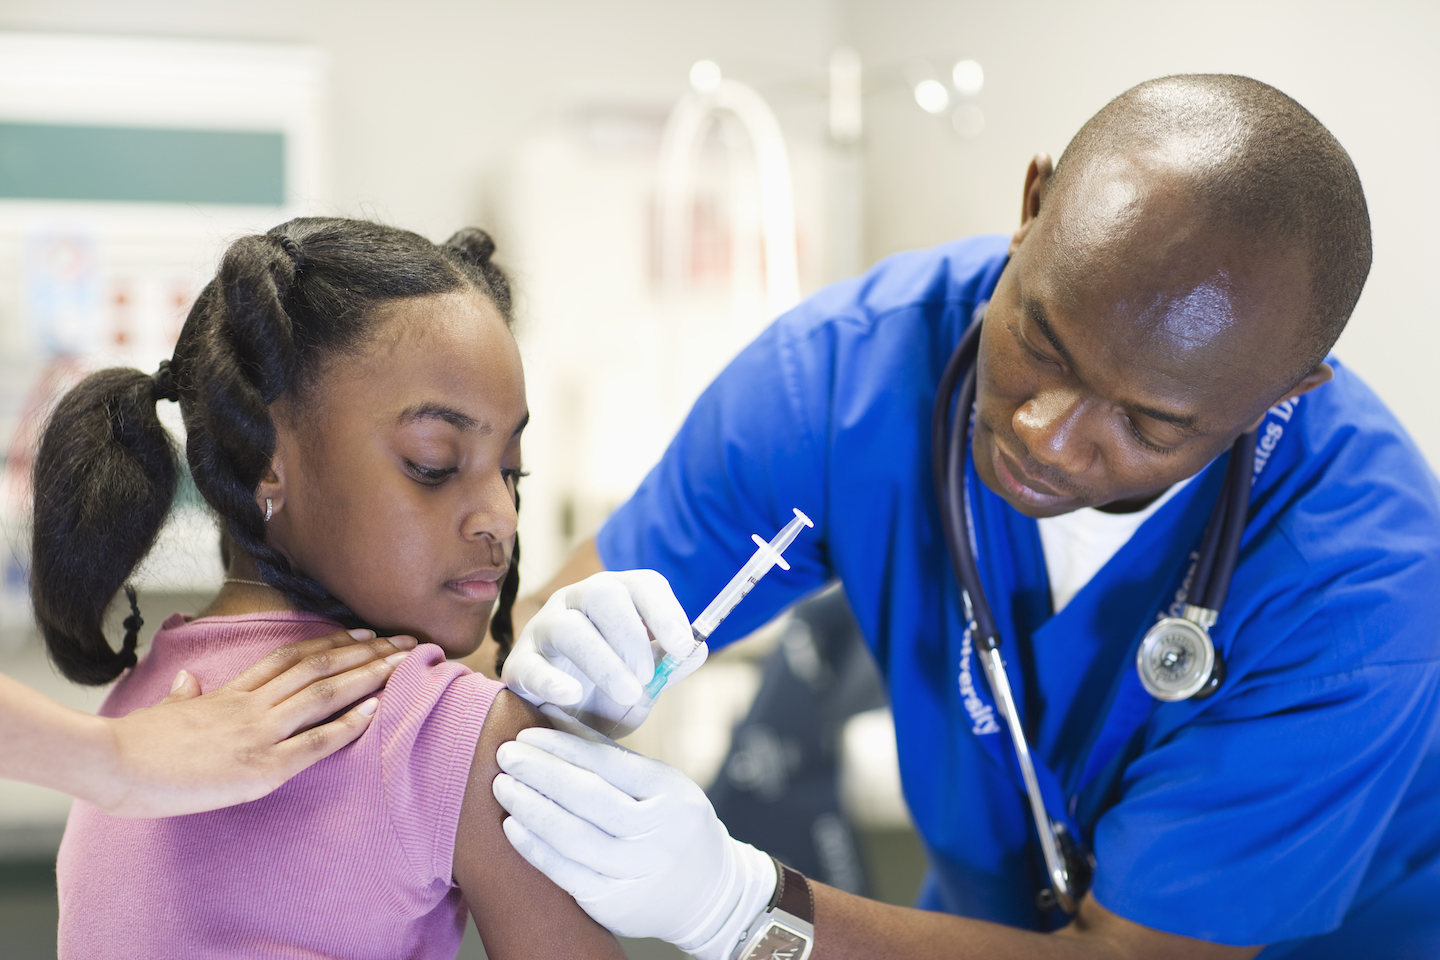 A man wearing blue scrubs injects a vaccine into a teen girl's arm